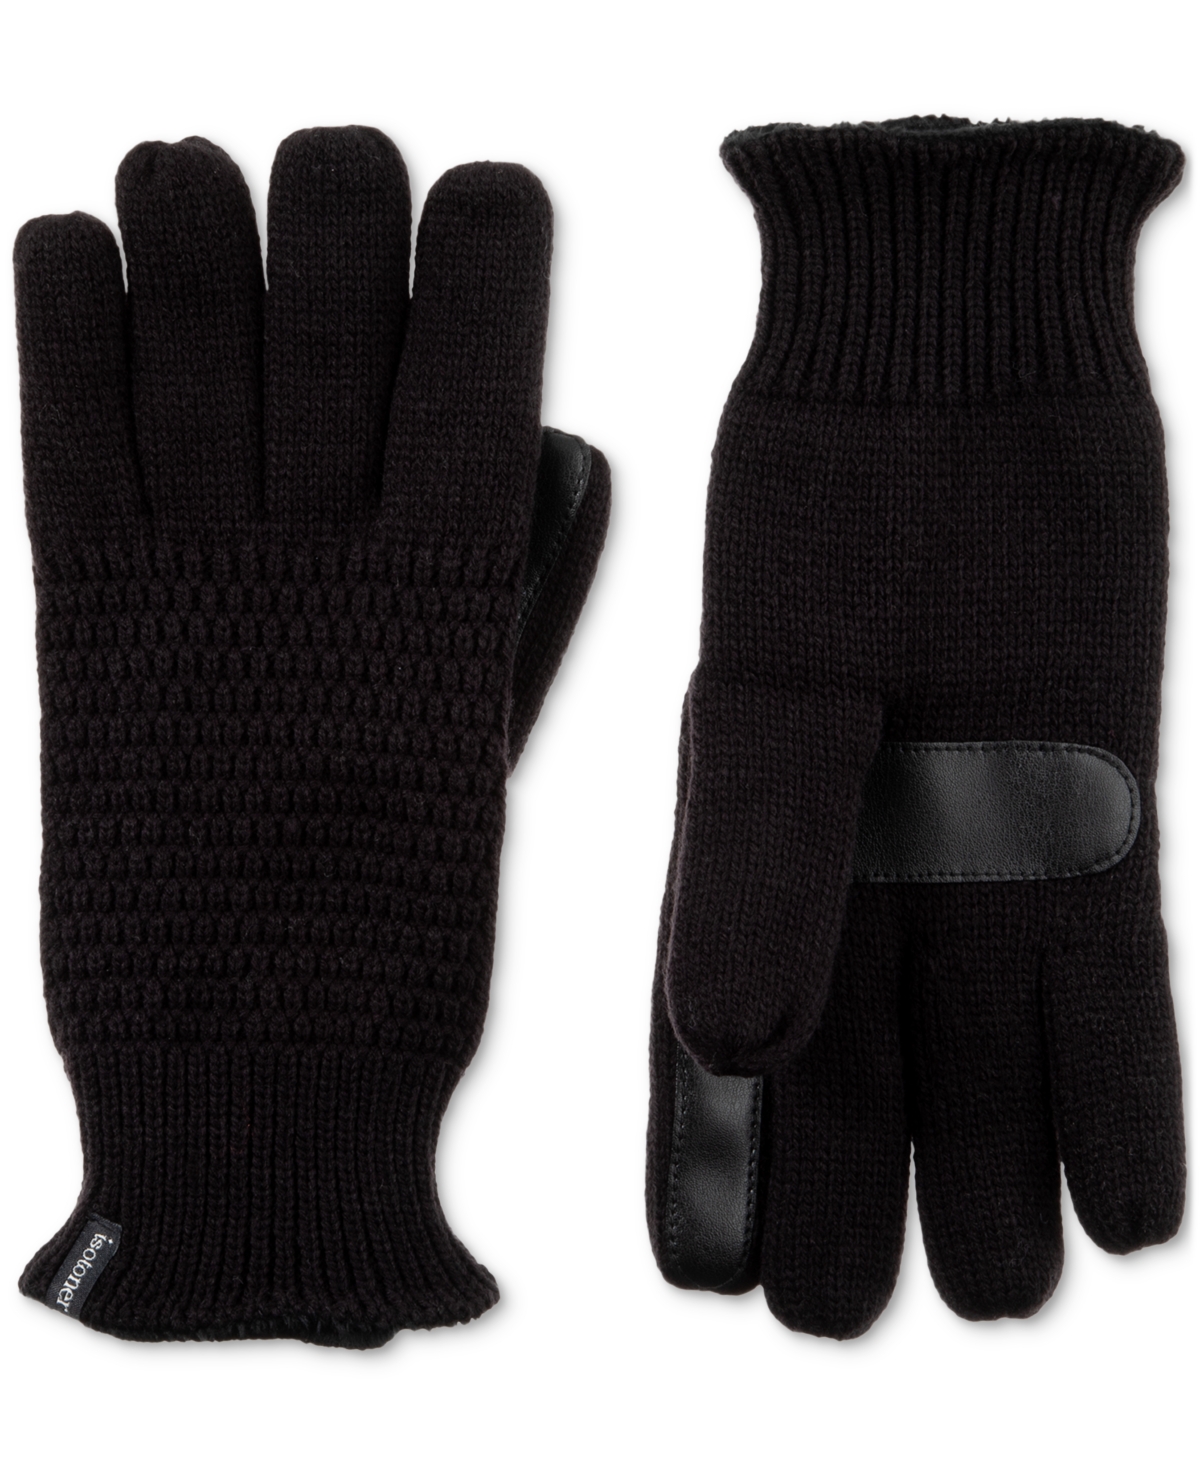 Isotoner Signature Women's Water-repellent Textured Knit Gloves In Black